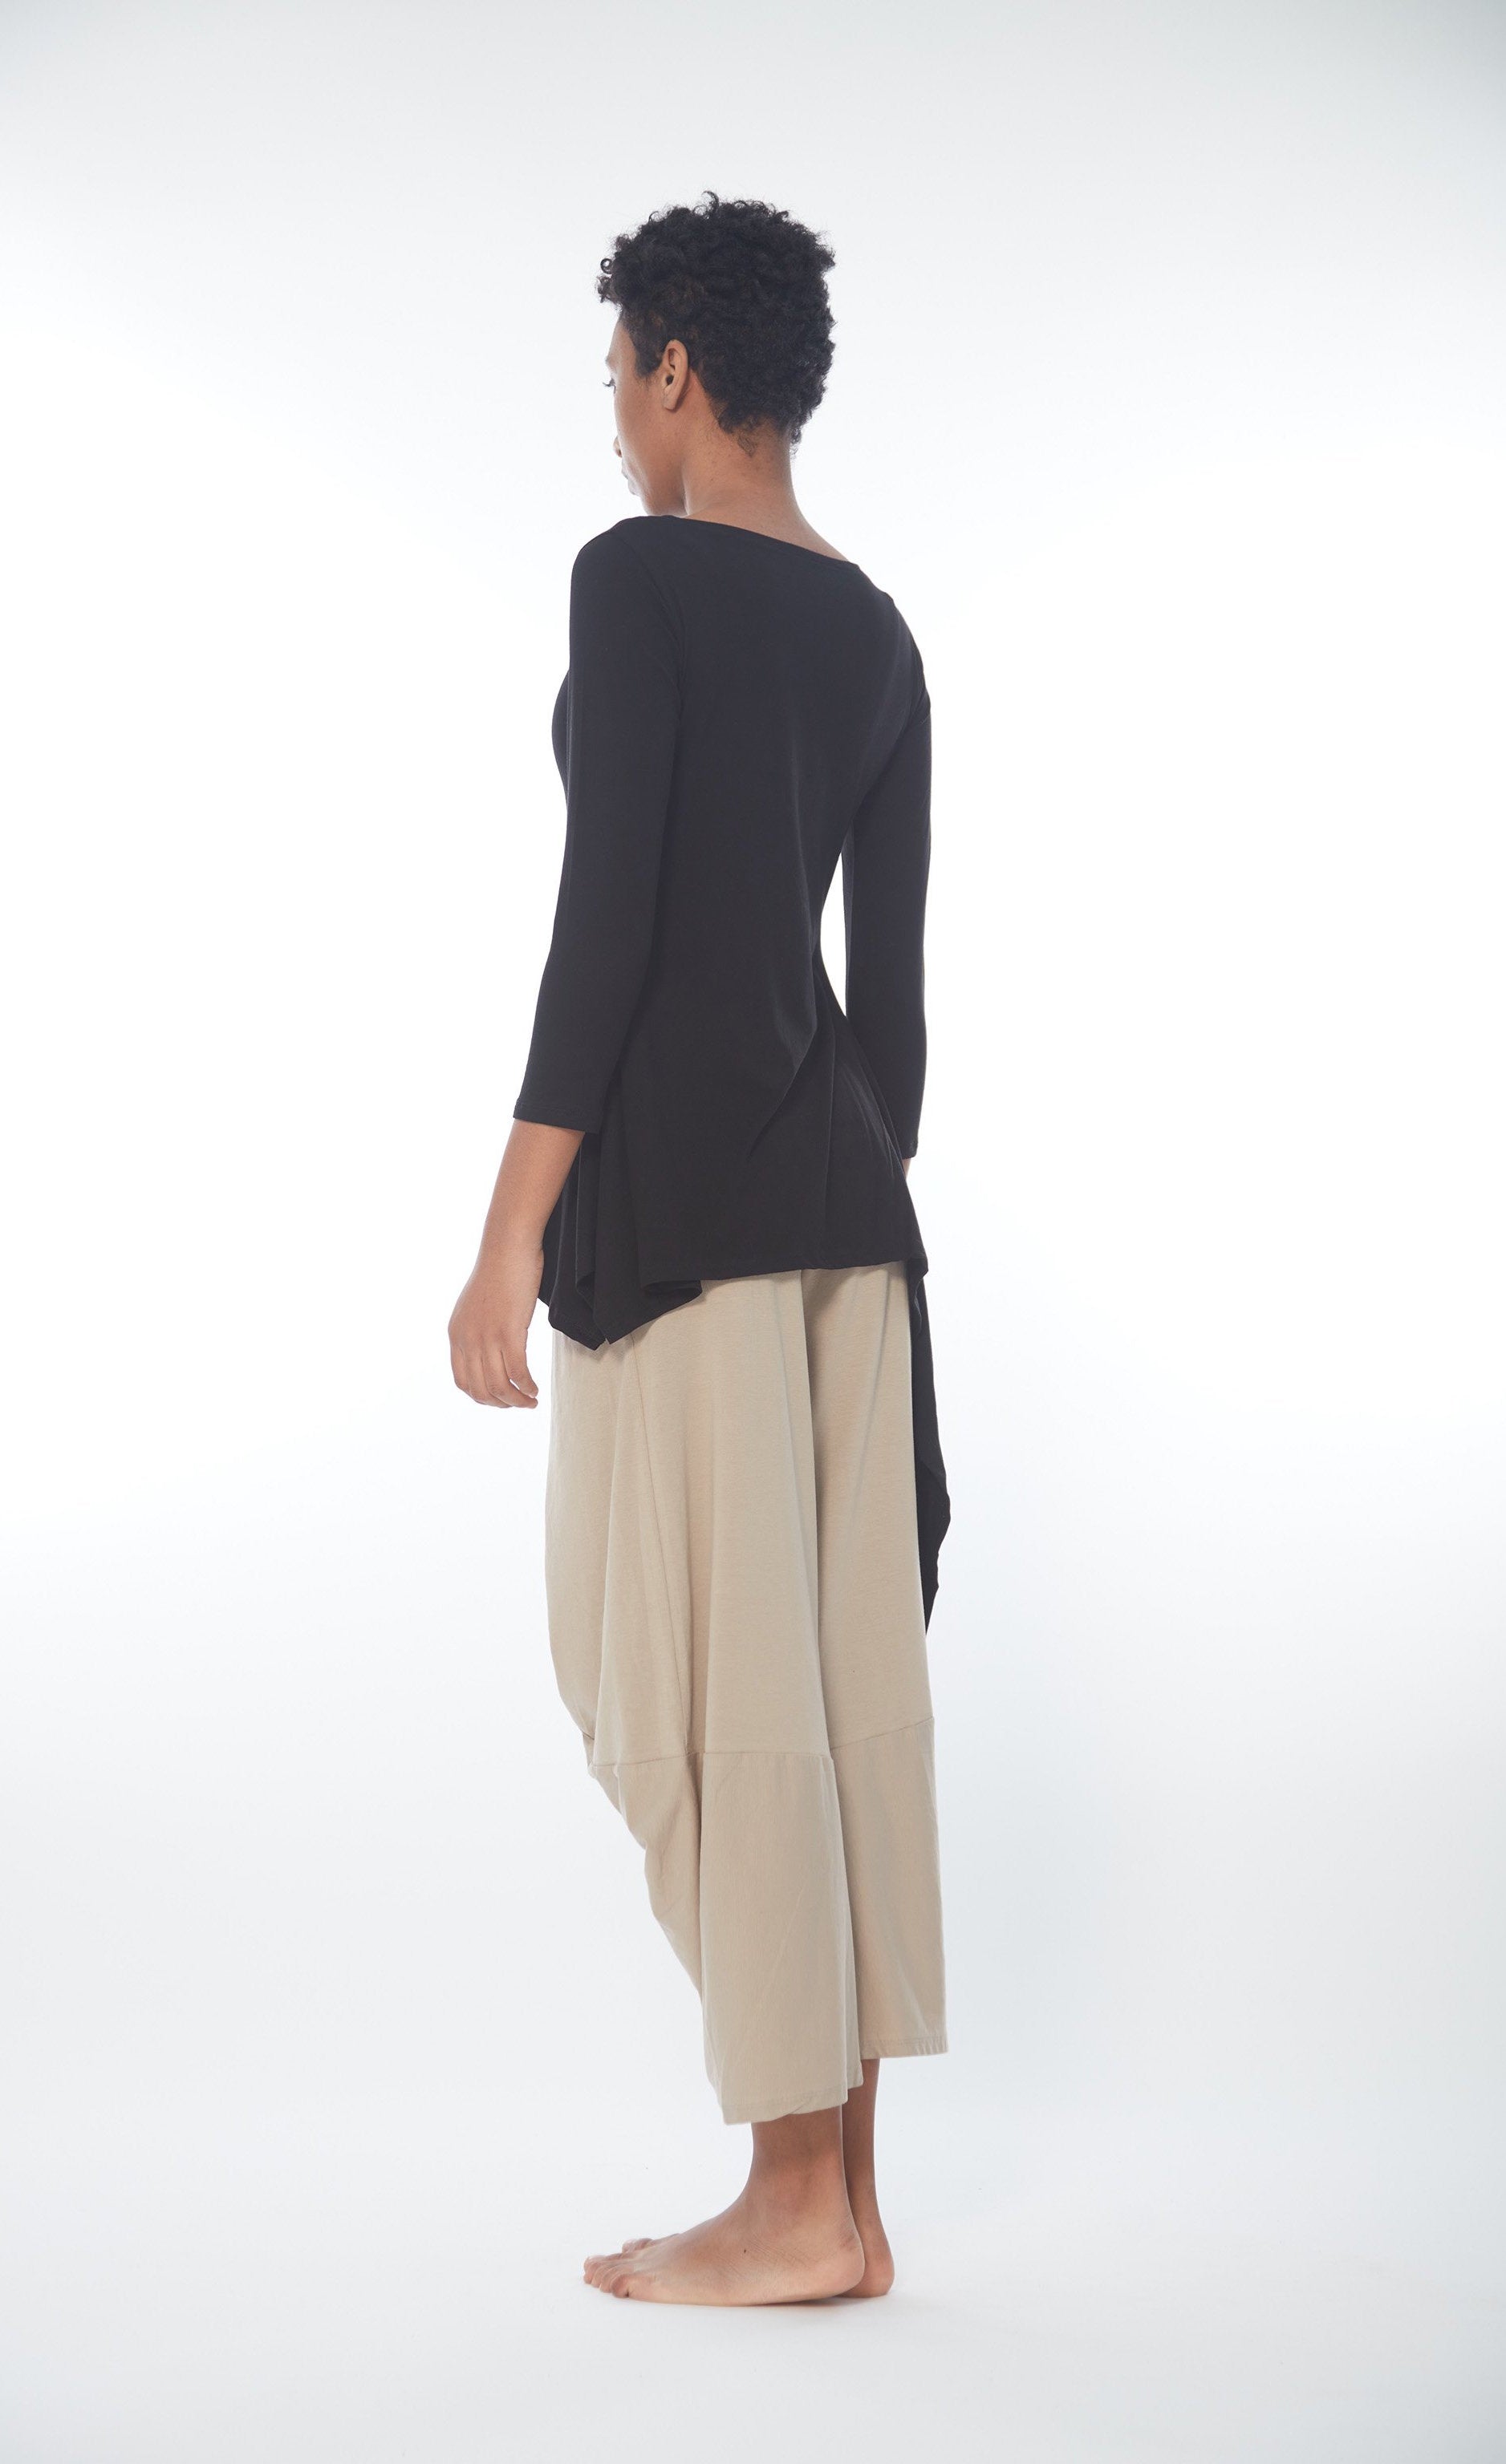 Back full body view of a woman wearing the Matthildur Safari Deck top. This image shows the black version of this top. The shirt has 3/4 length sleeves, a boat neck, and a longer right side that goes down below the knees.